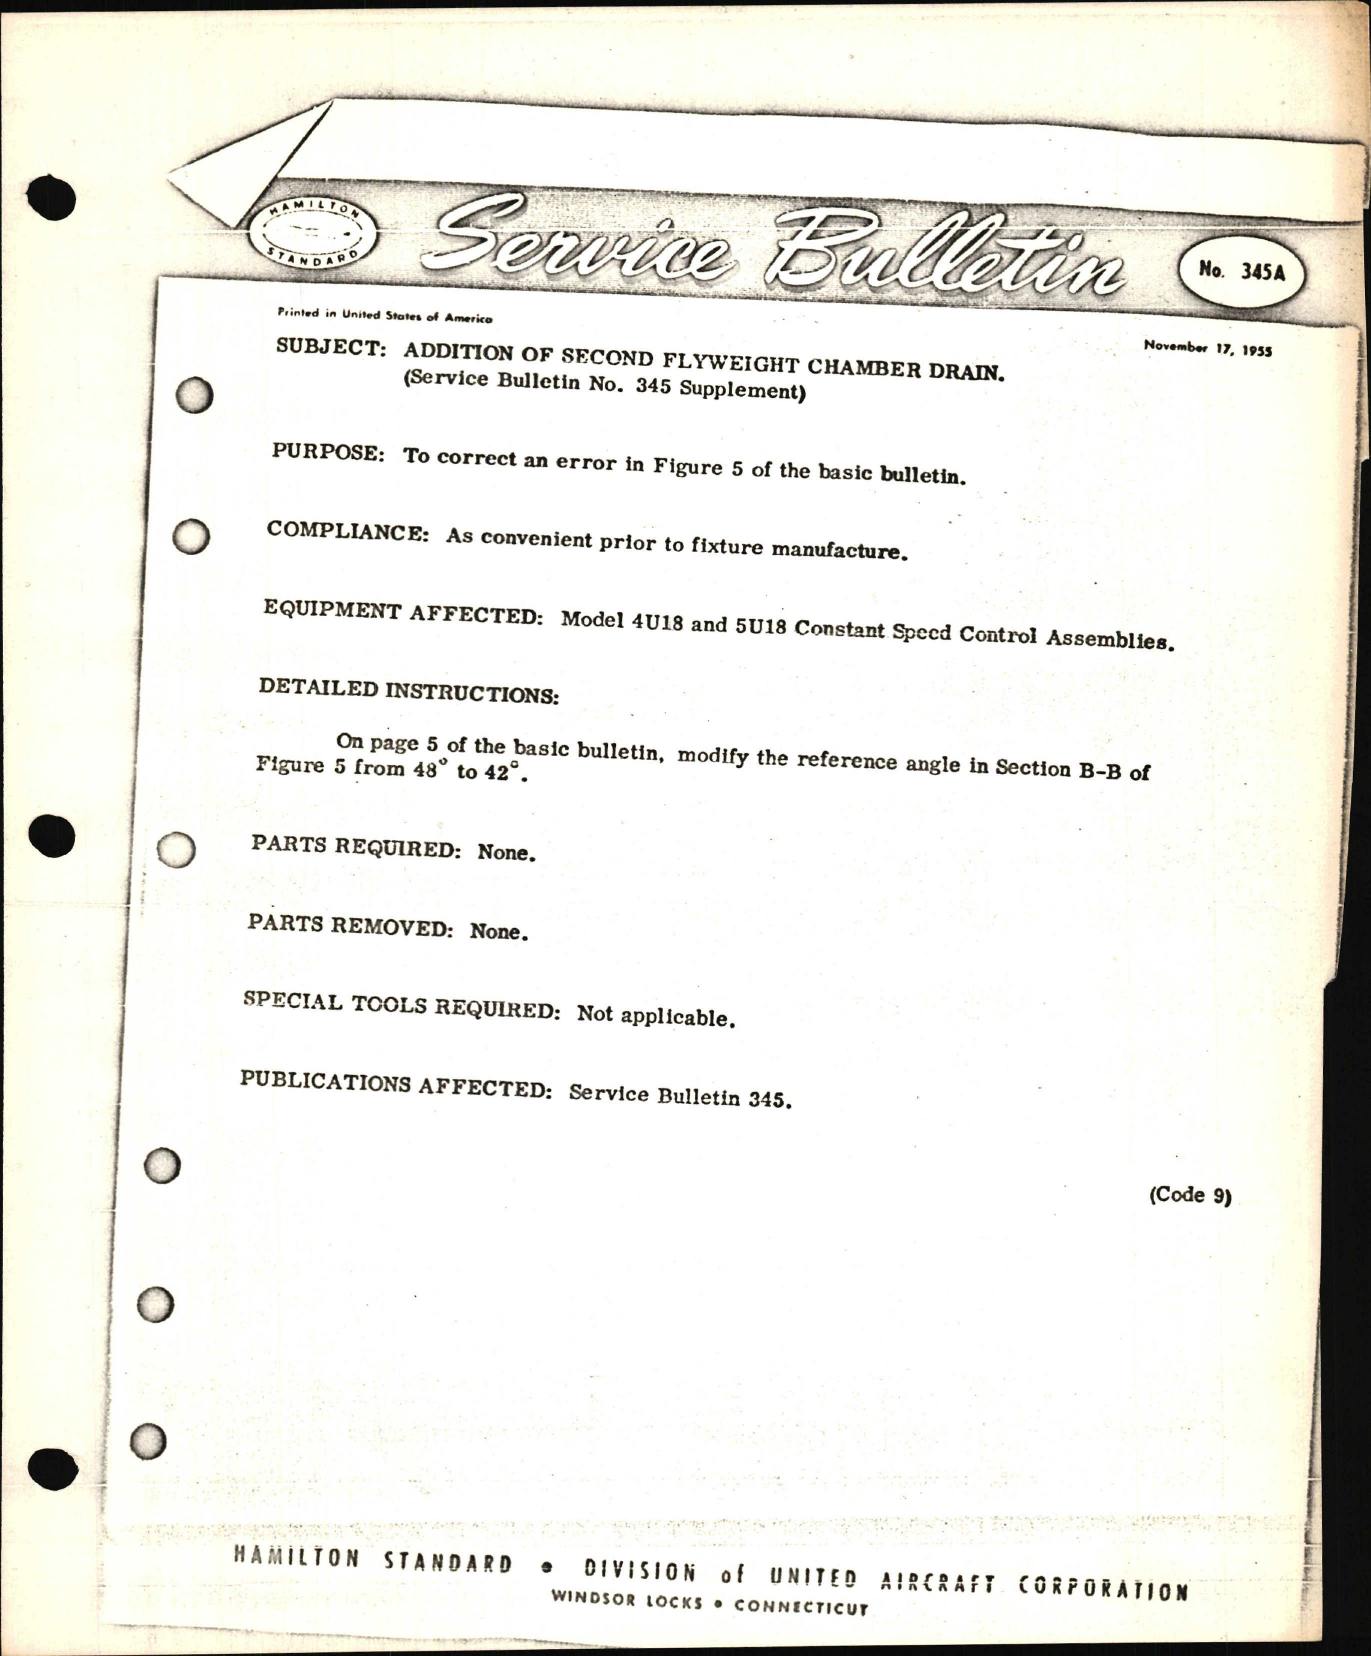 Sample page 1 from AirCorps Library document: Addition of Second Flyweight Chamber Drain